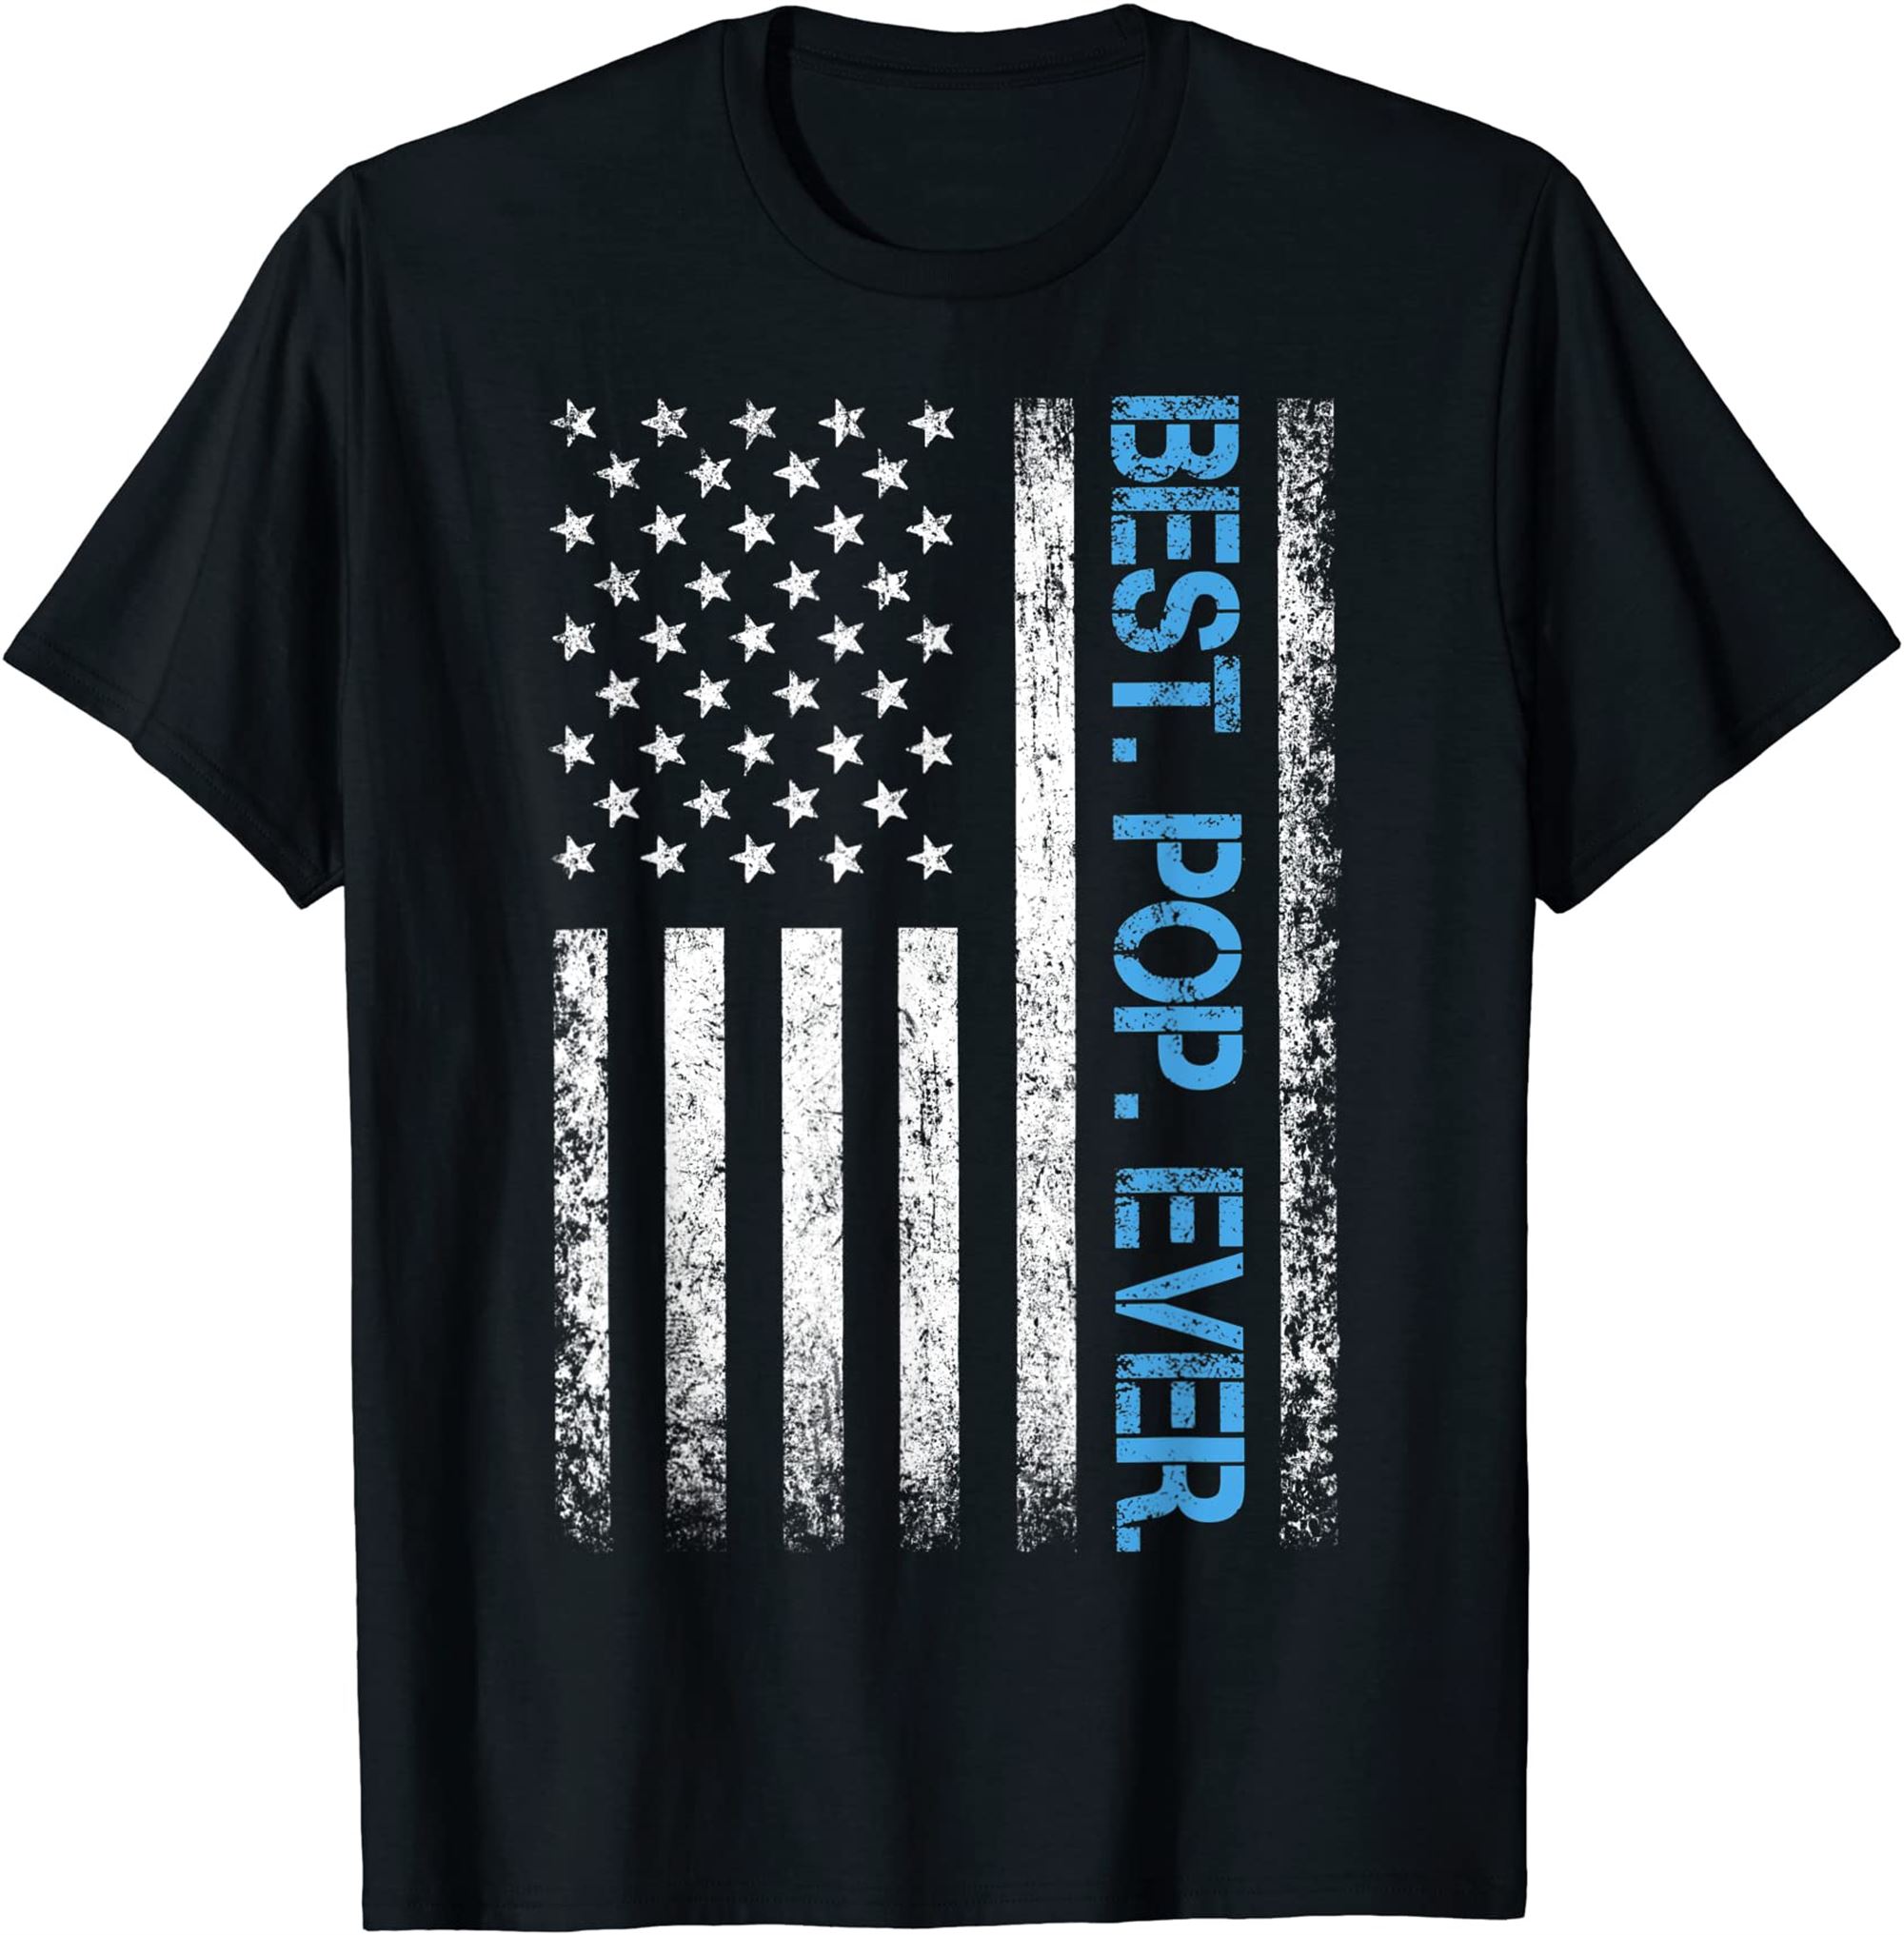 Best Pop Ever Vintage American Flag T Shirt T-shirt Full Size Up To 5xl